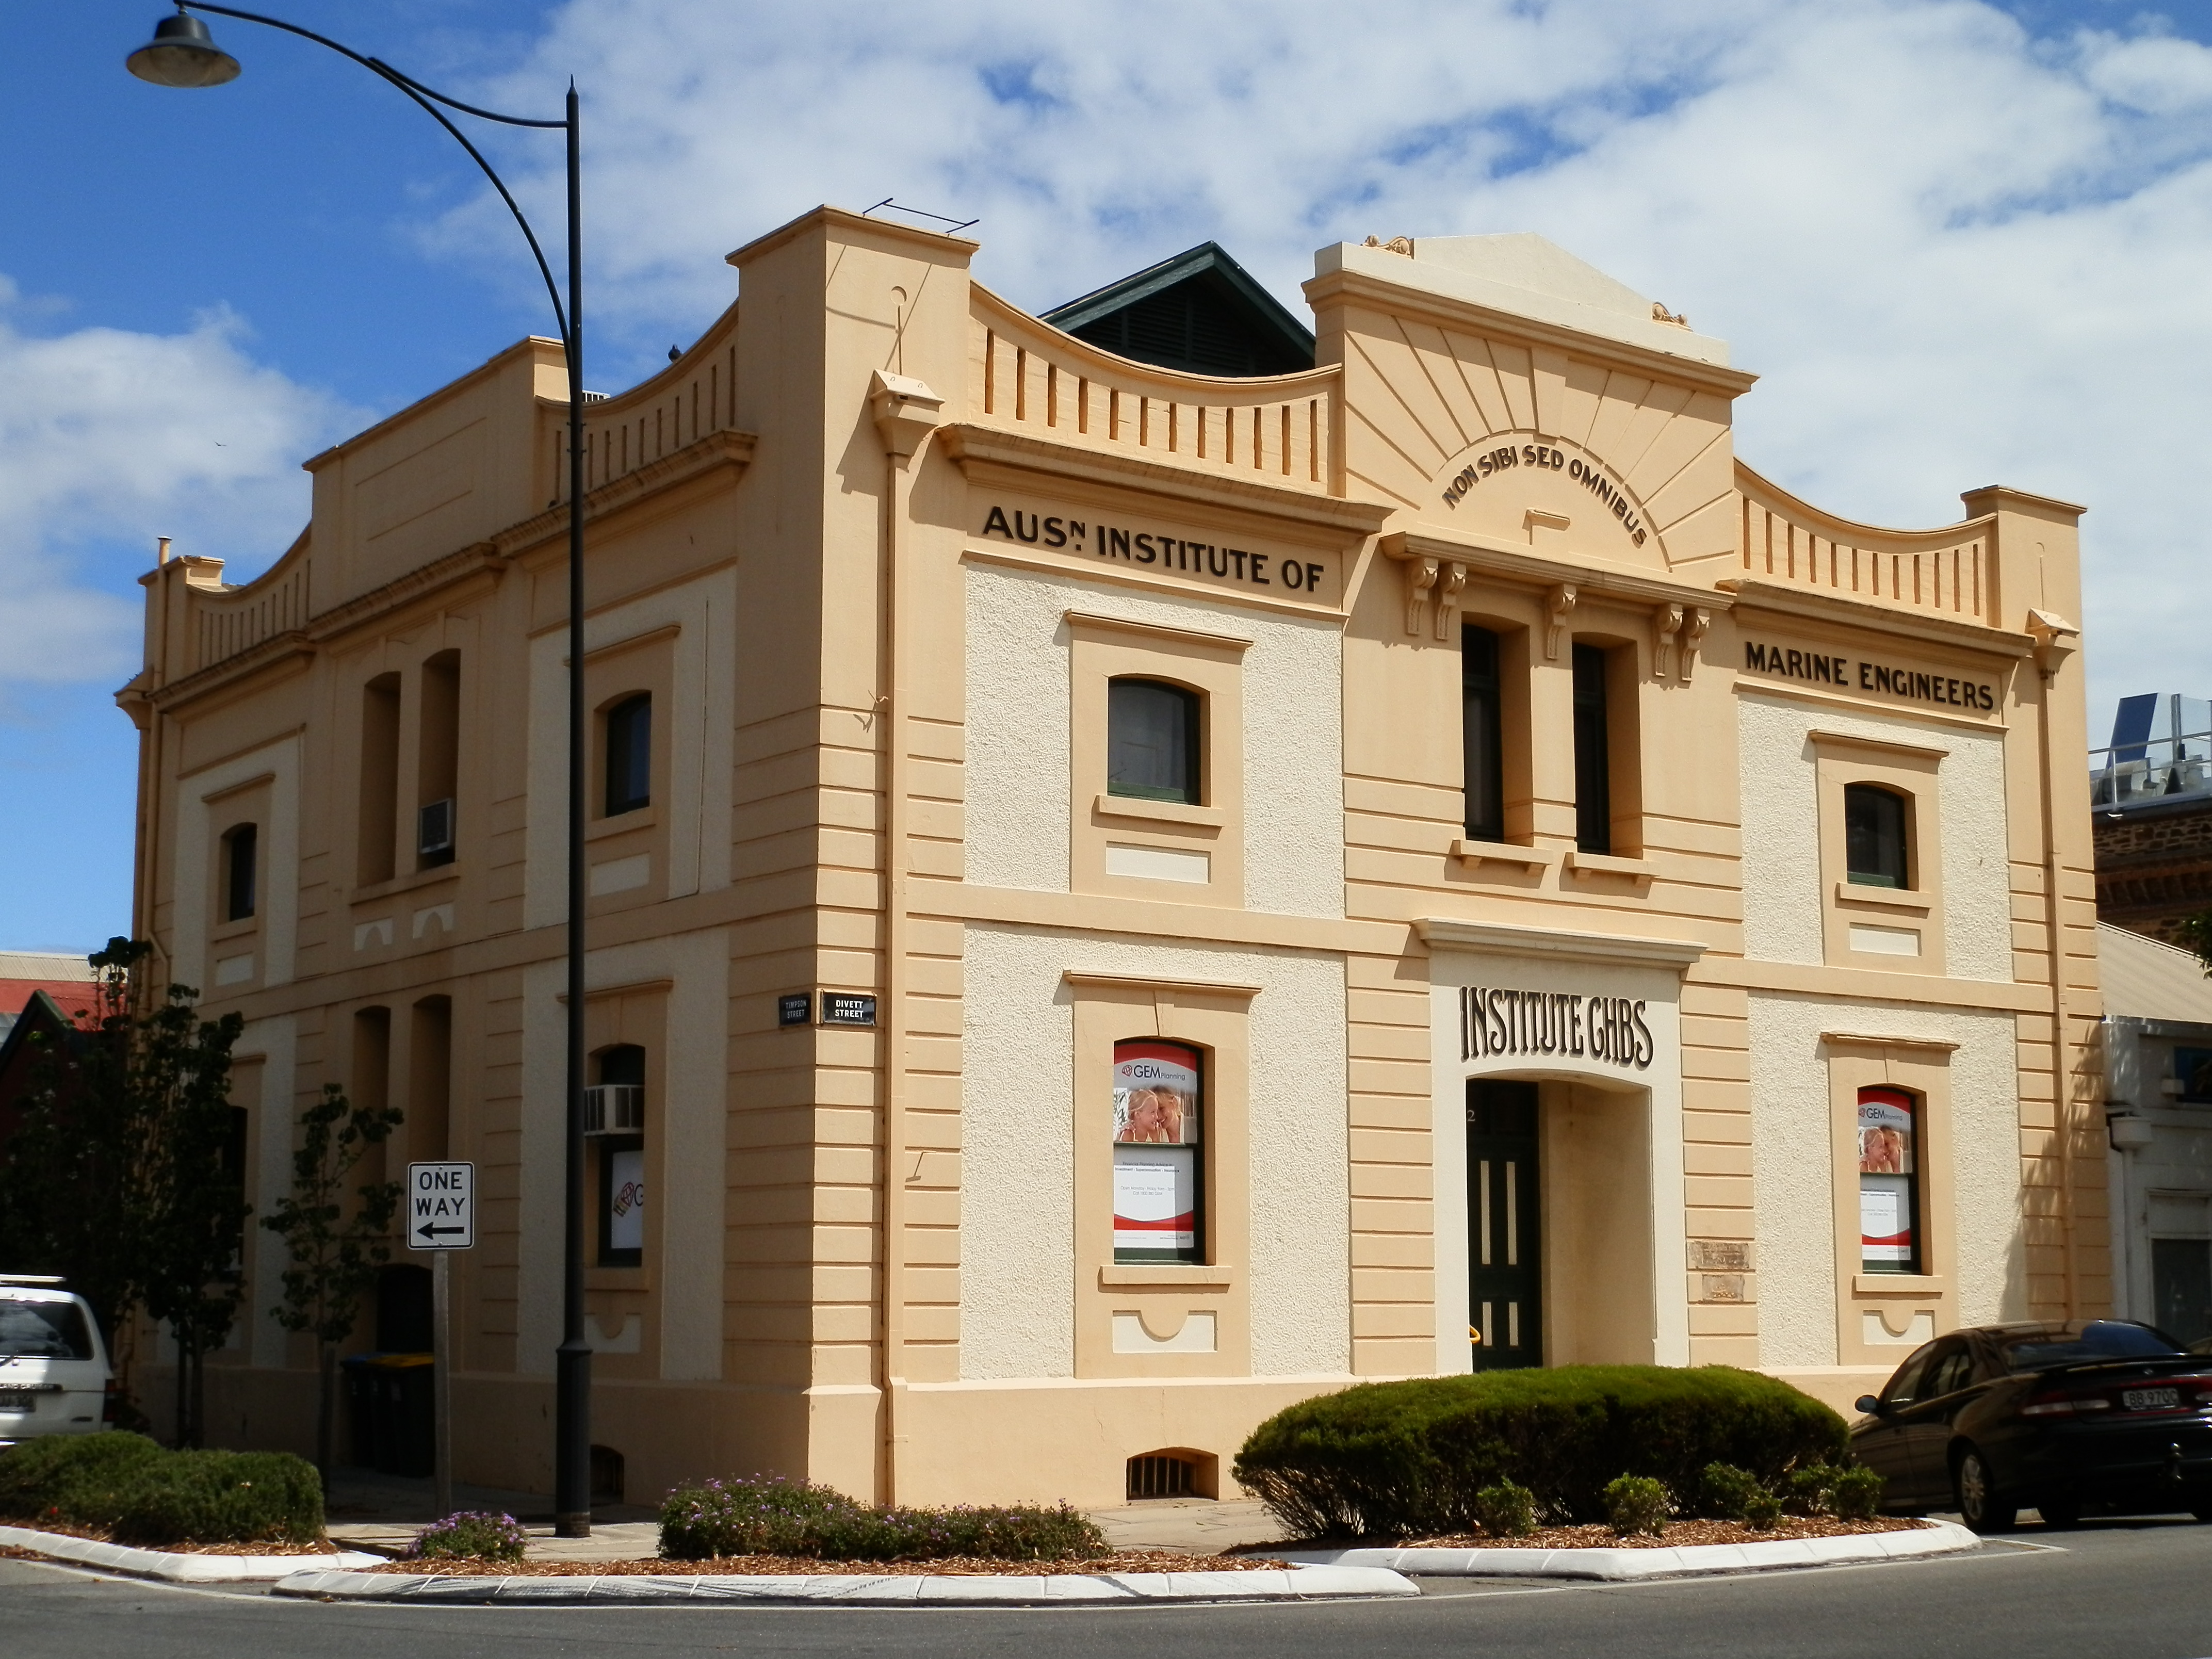 AIMPE building in Port Adelaide SA at the time of the centenary of AIMPE ownership in 2013